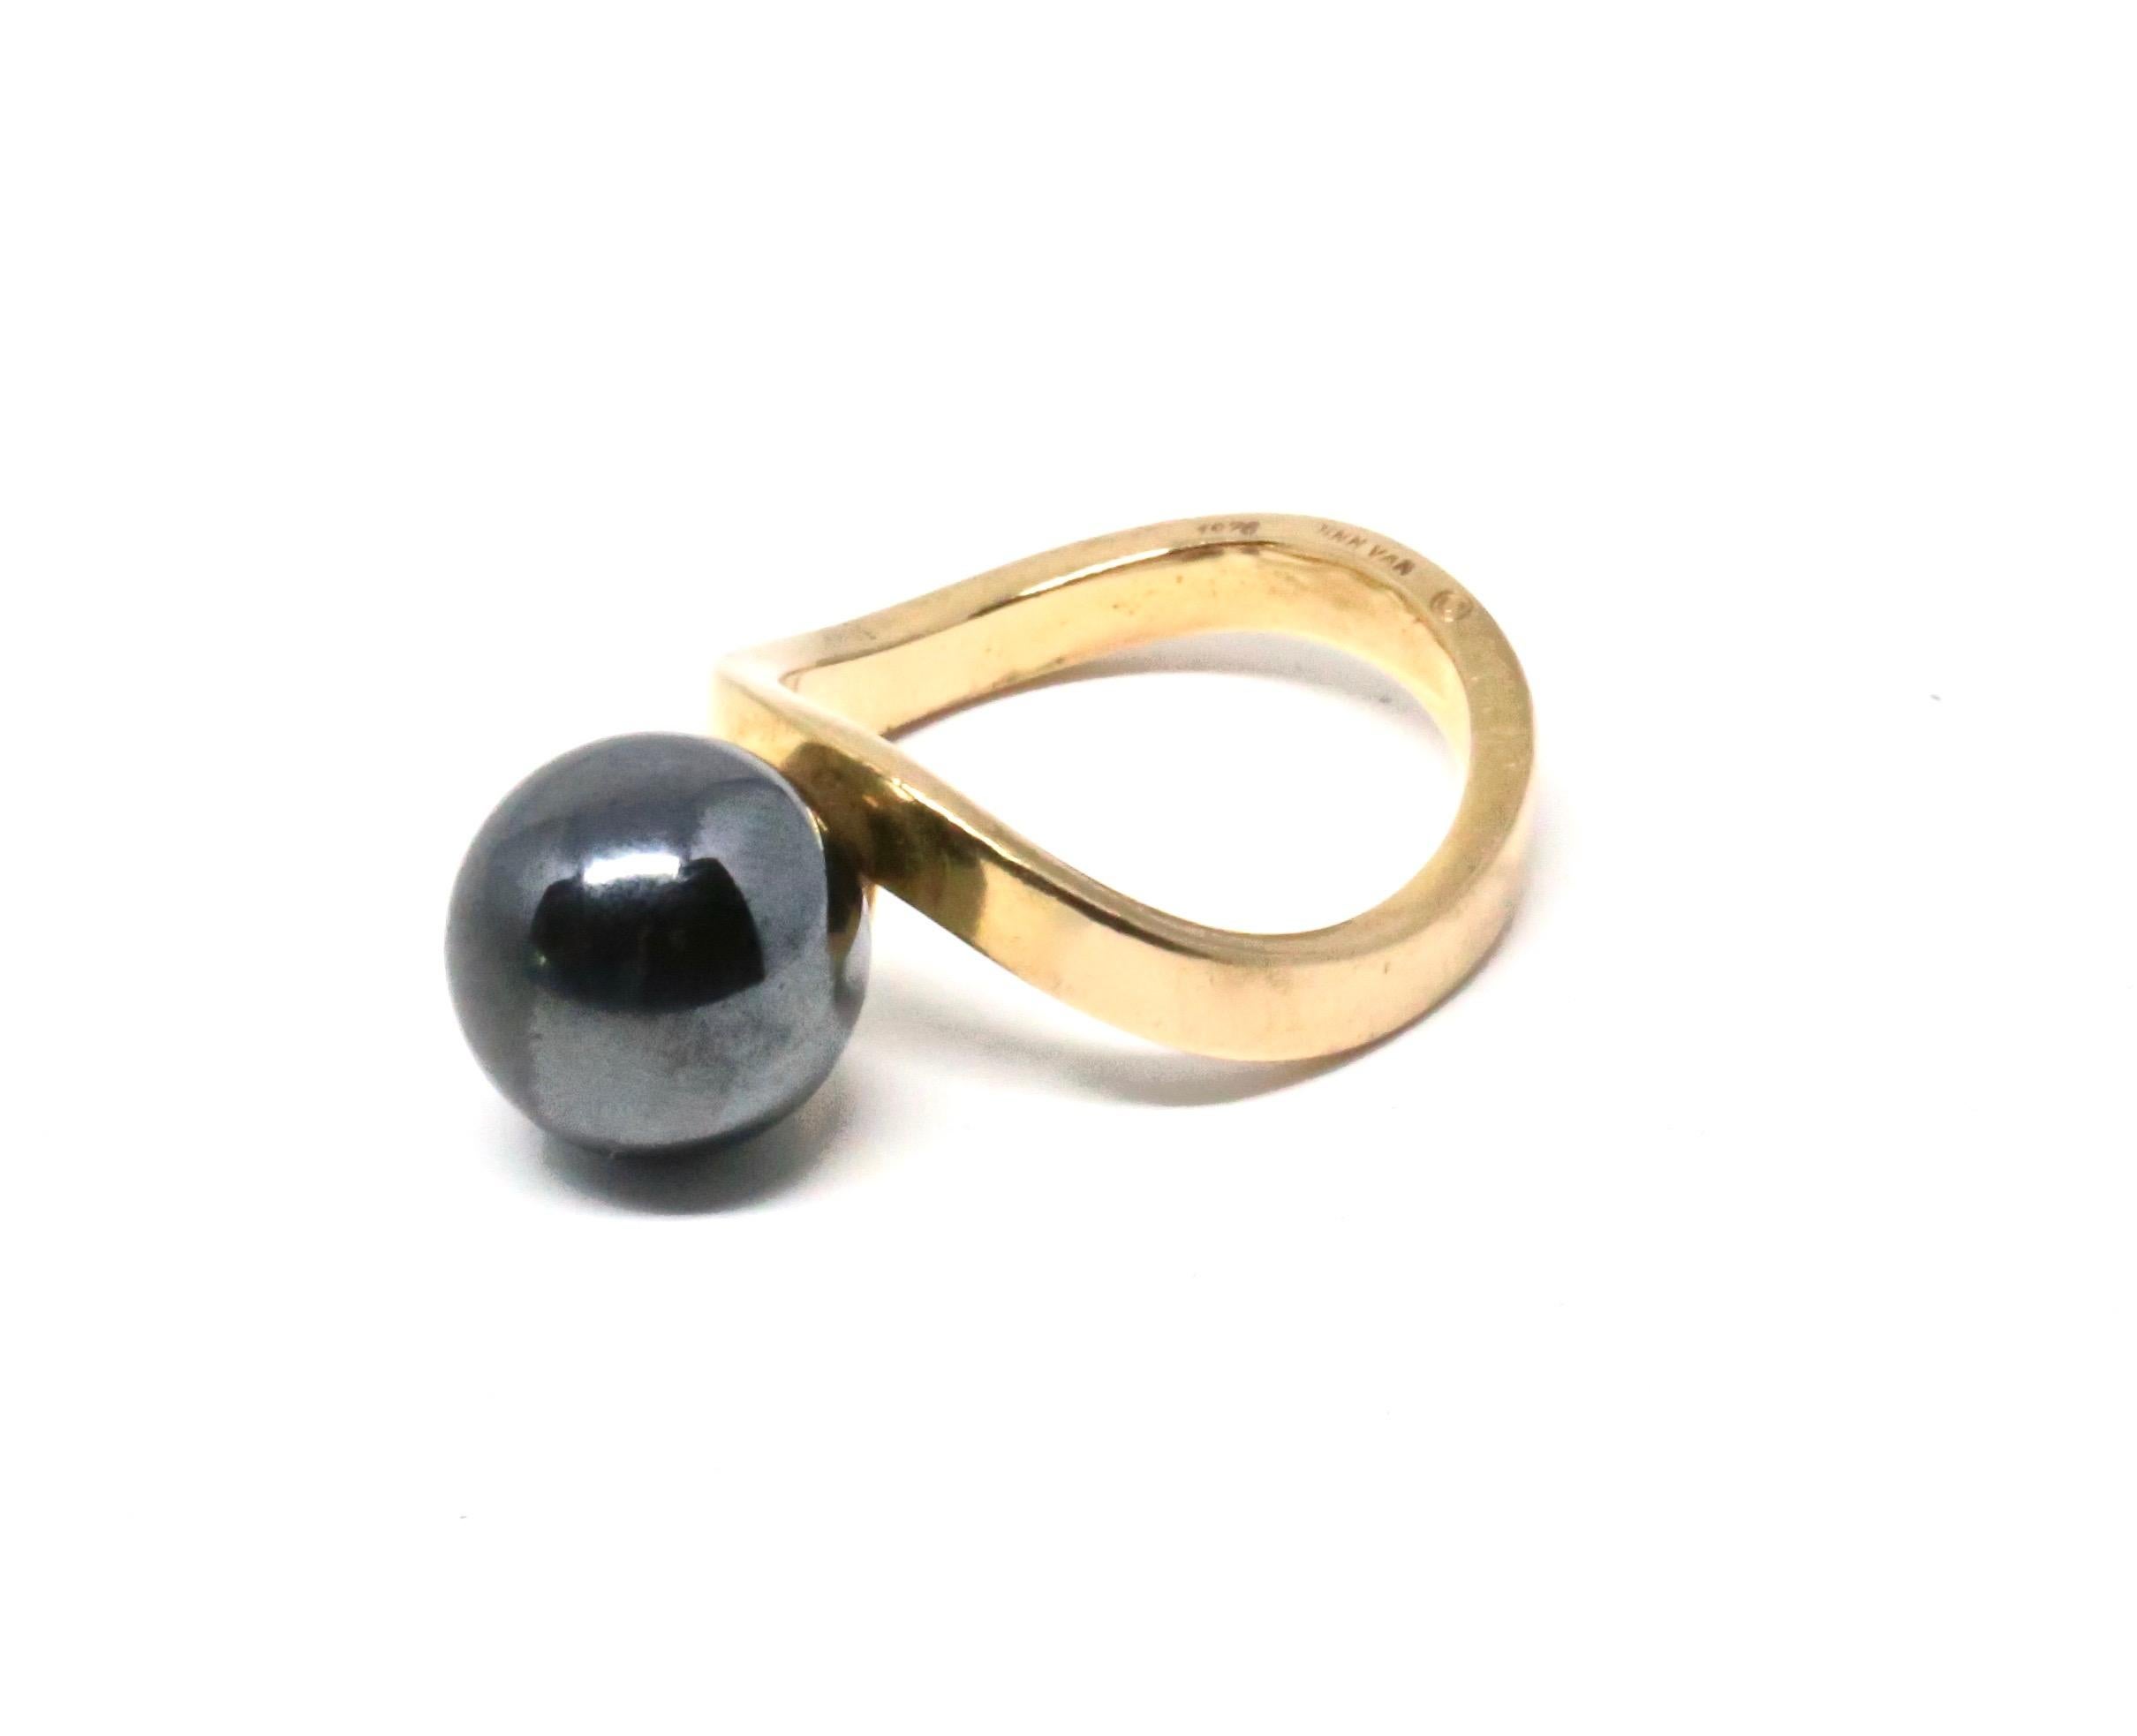 18k yellow gold ring with unique shank and hematite sphere designed by Jean Dinh Van dating to 1970. Ring best fits a US ring size 6. Signed, dated and hallmarked. Made in France. Good condition.